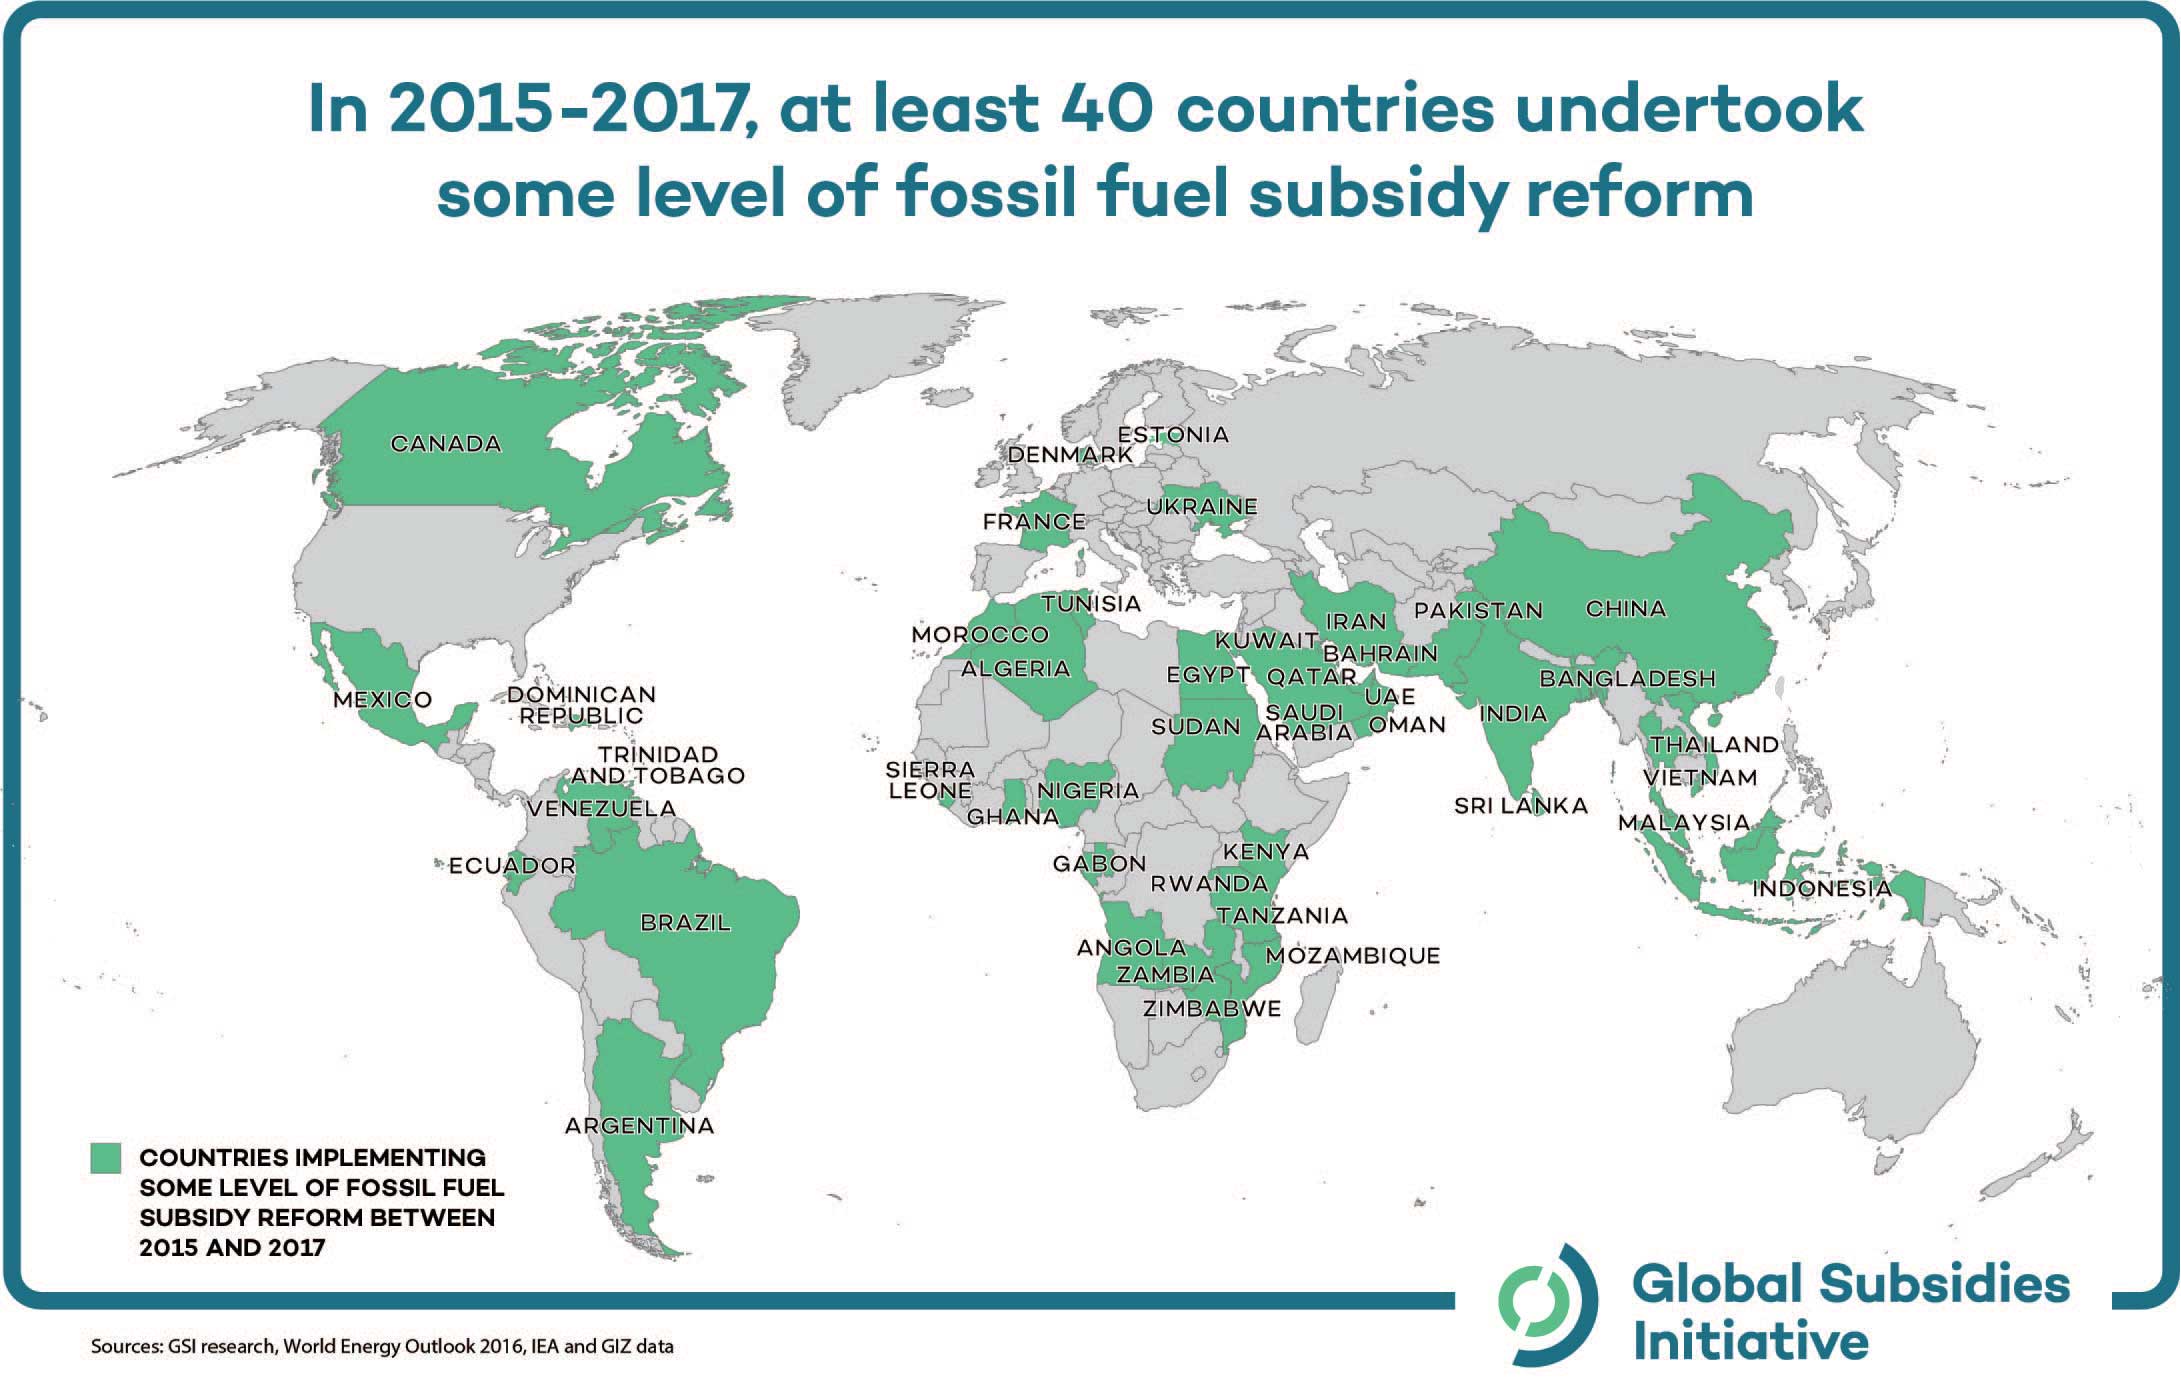 At least 40 countries undertook some fossil fuel subsidy reform from 2015-2017